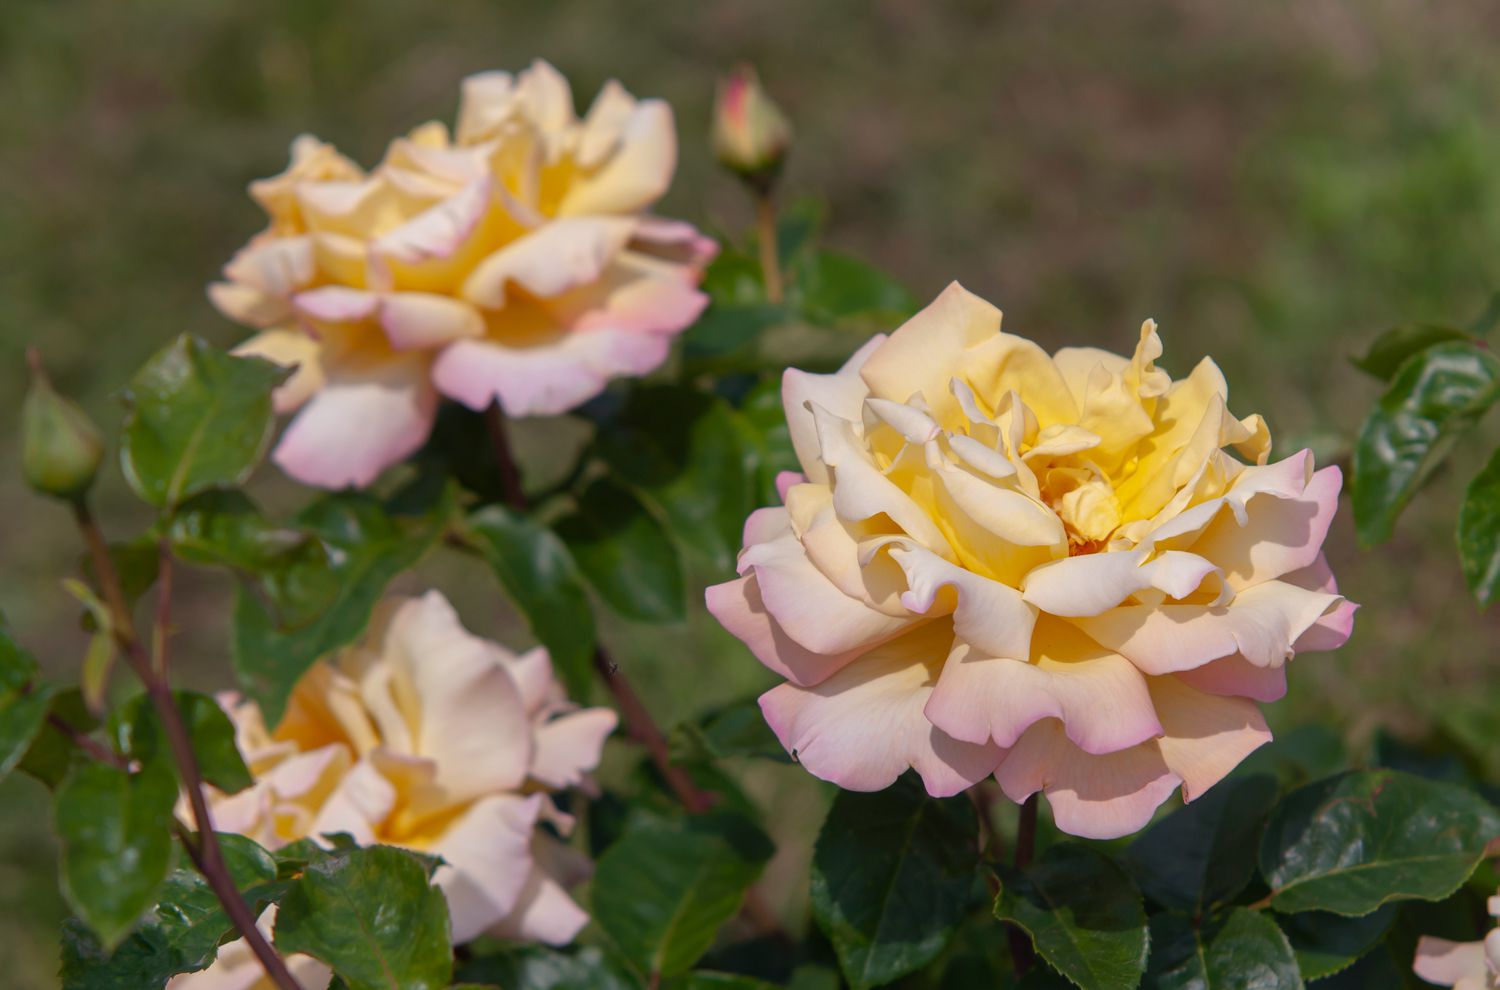 Hybrid tea 'peace' rose with layers of yellow, light pink and white petals in sunlight